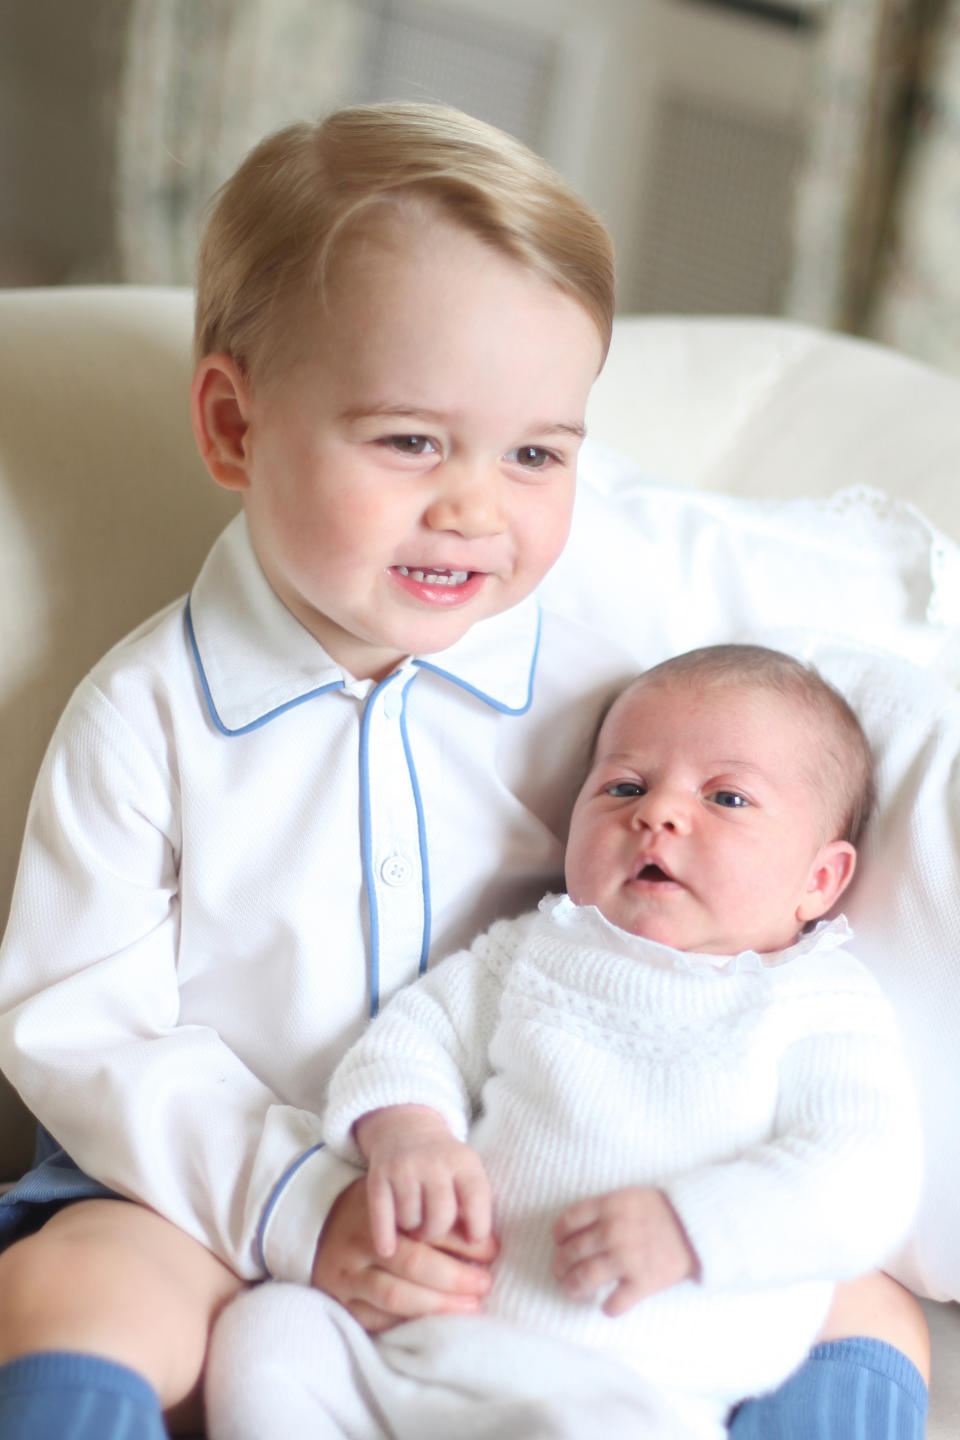 AMMER, ENGLAND - MAY 2015: In this undated handout image released by the Duke and Duchess of Cambridge, Prince George and Princess Charlotte at Anmer Hall in mid-May in Norfolk, England. (Photo by HRH The Duchess of Cambridge via Getty Images)  NEWS EDITORIAL USE ONLY. NO COMMERCIAL USE (including any use in merchandising, advertising or any other non-editorial use including, for example, calendars, books and supplements). This photograph is provided to you strictly on condition that you will make no charge for the supply, release or publication of it and that these conditions and restrictions will apply (and that you will pass these on) to any organisation to whom you supply it. All other requests for use should be directed to the Press Office at Kensington Palace in writing.